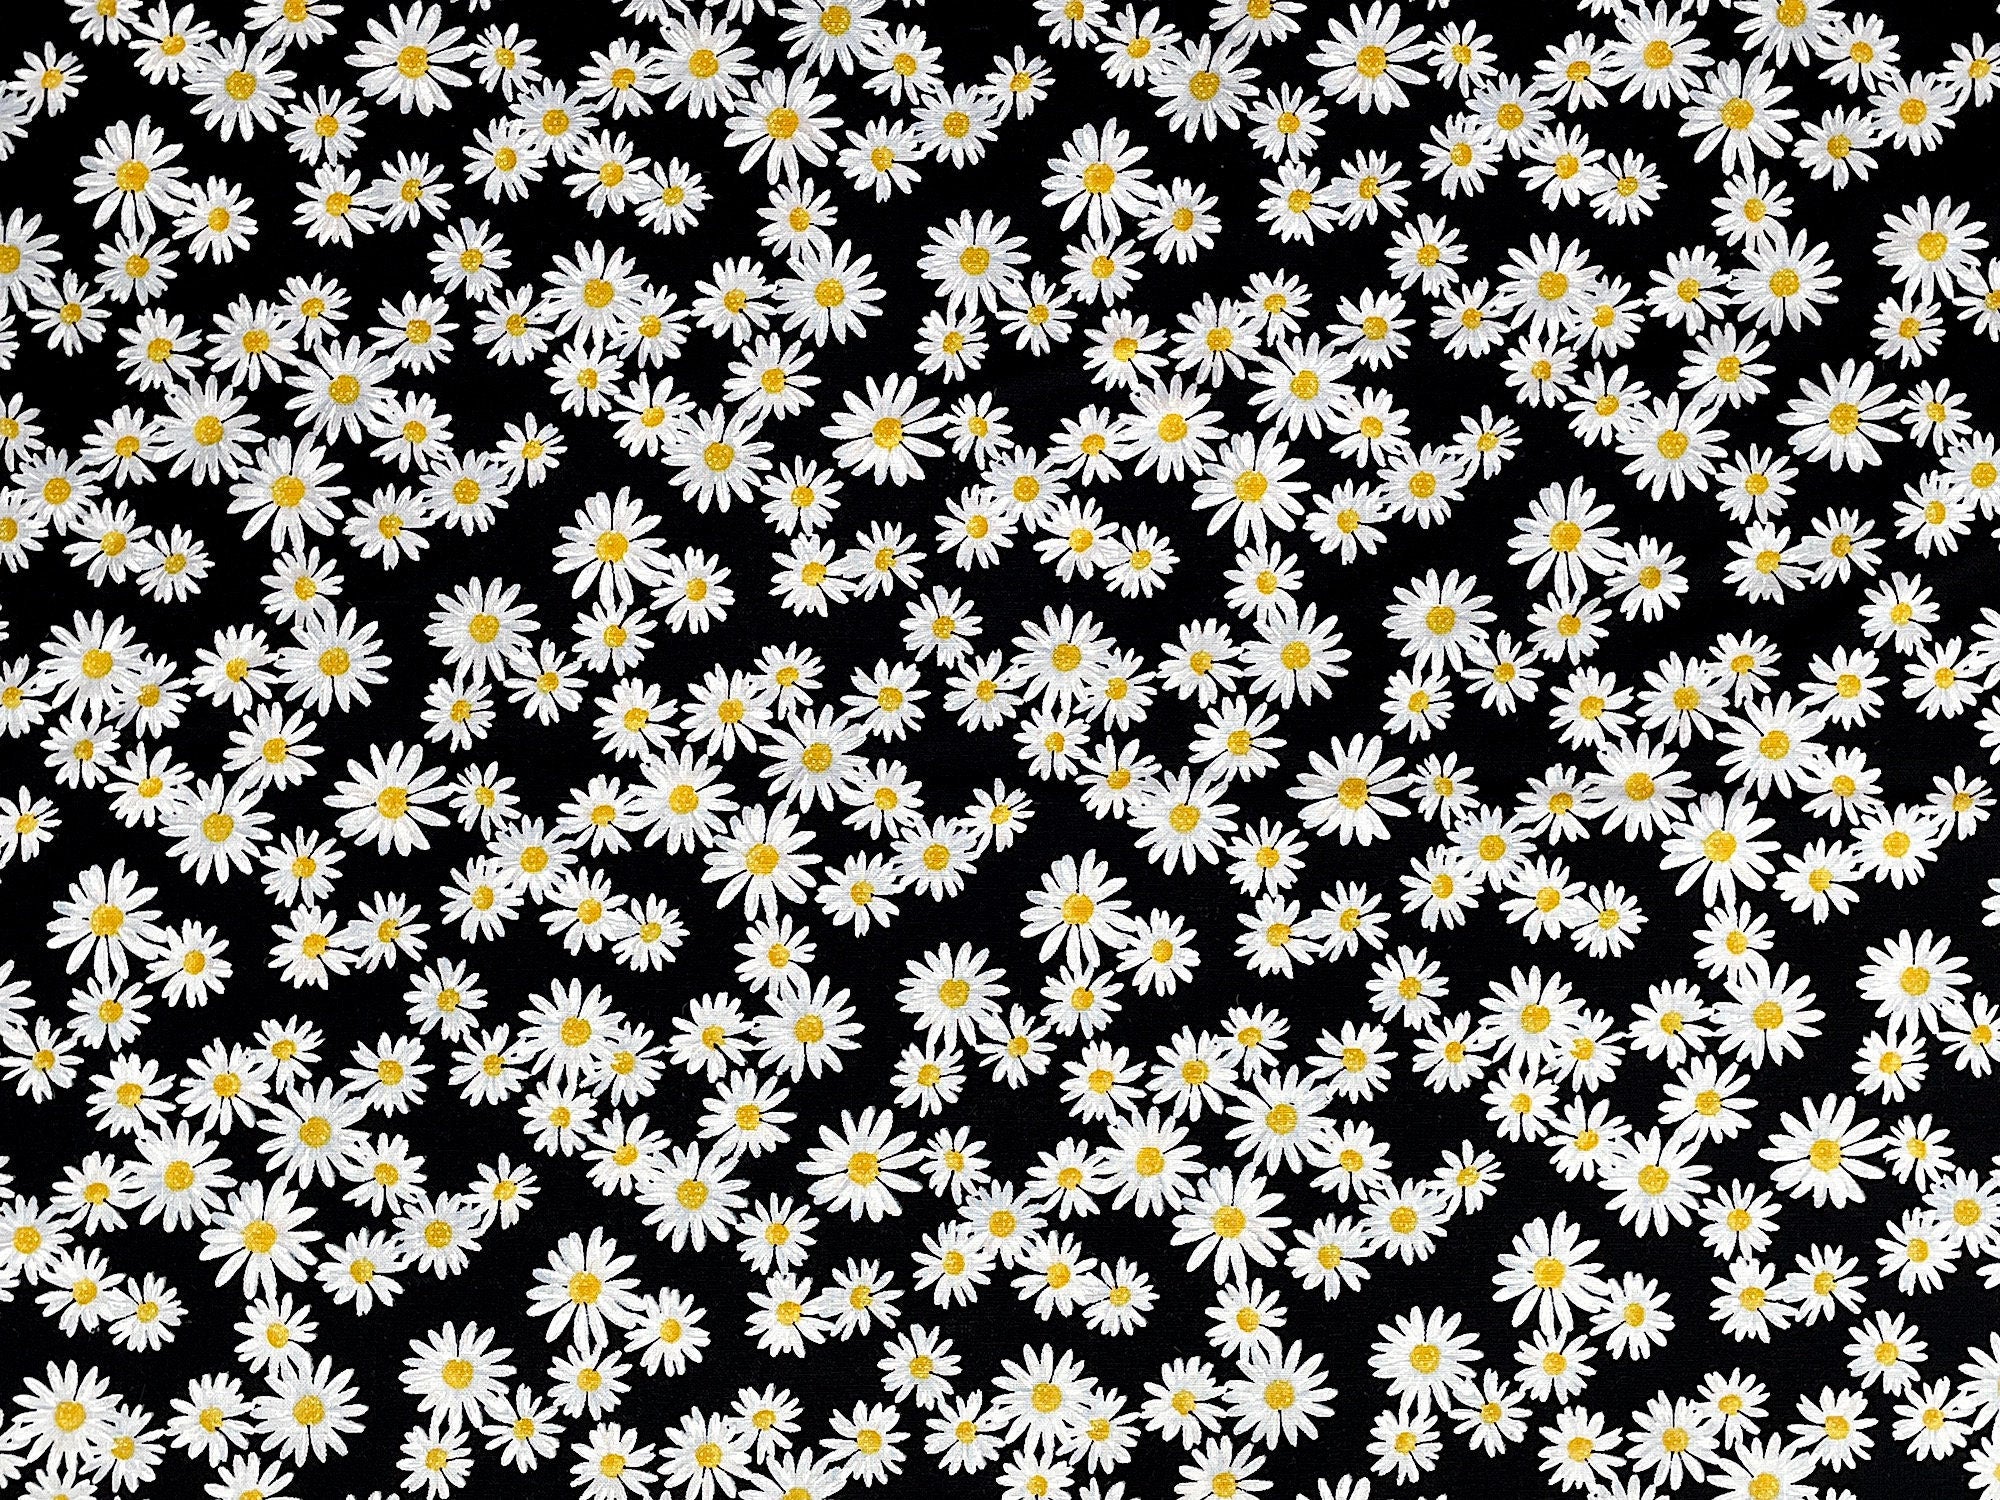 White Daisies with yellow centers on a black background. This fabric is part of the Daisy Delight collection by Kanvas Studio